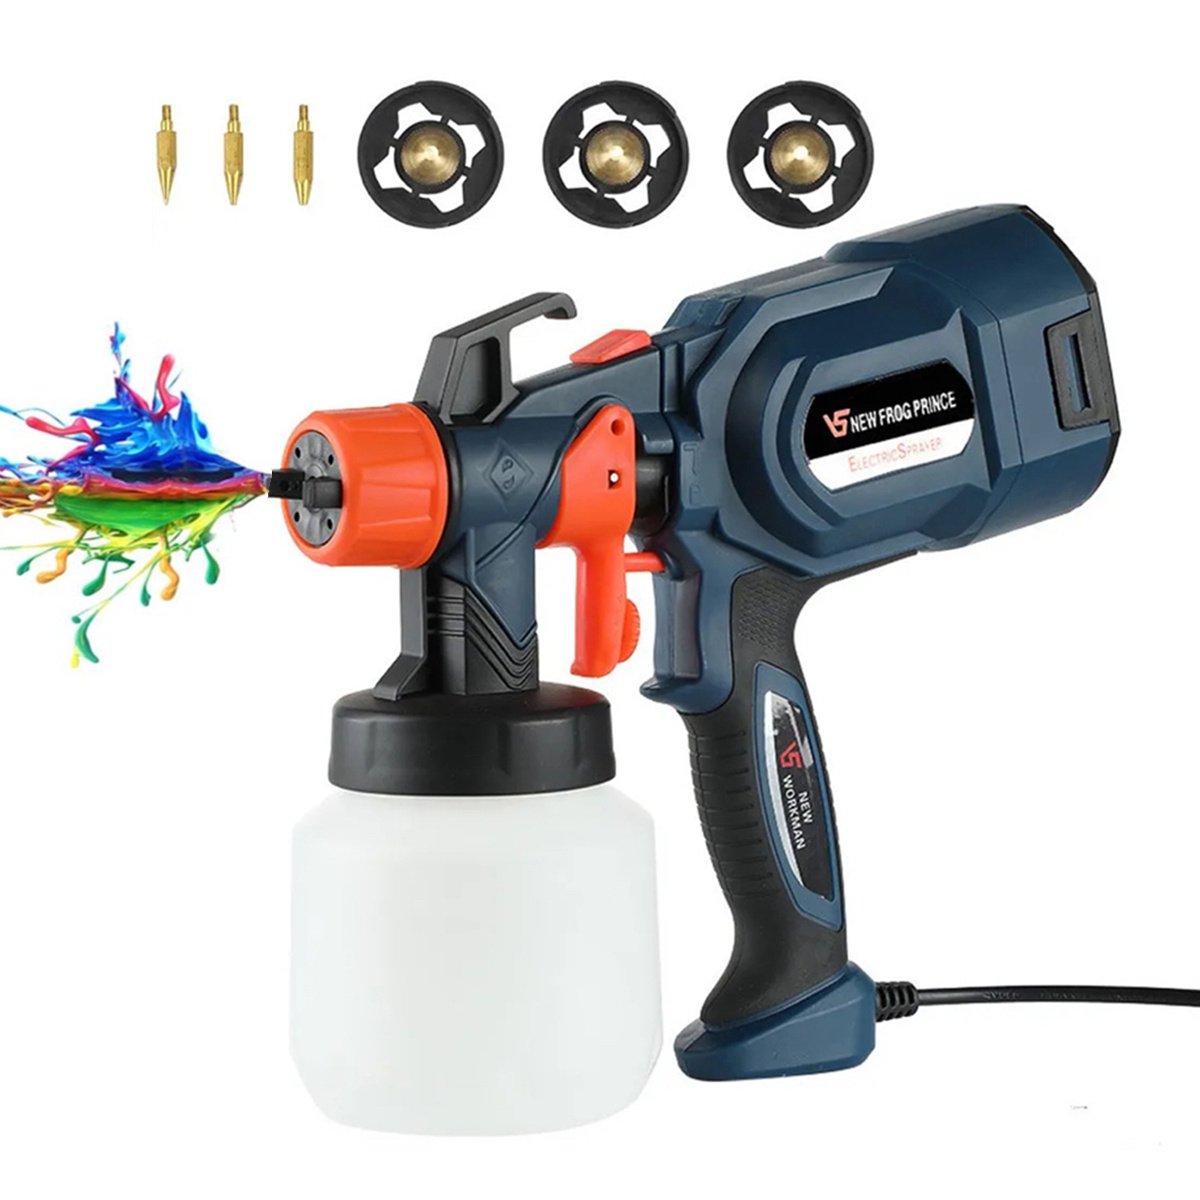 Doosl Paint Gun, 650W Electric Paint Sprayer with Easy-To-Go 850ml Container, 3 Nozzles 3 Spray Patterns, Ideal for Home Interior and Exterior Walls, Ceiling, Fence, Cabinet, Furniture, Blue